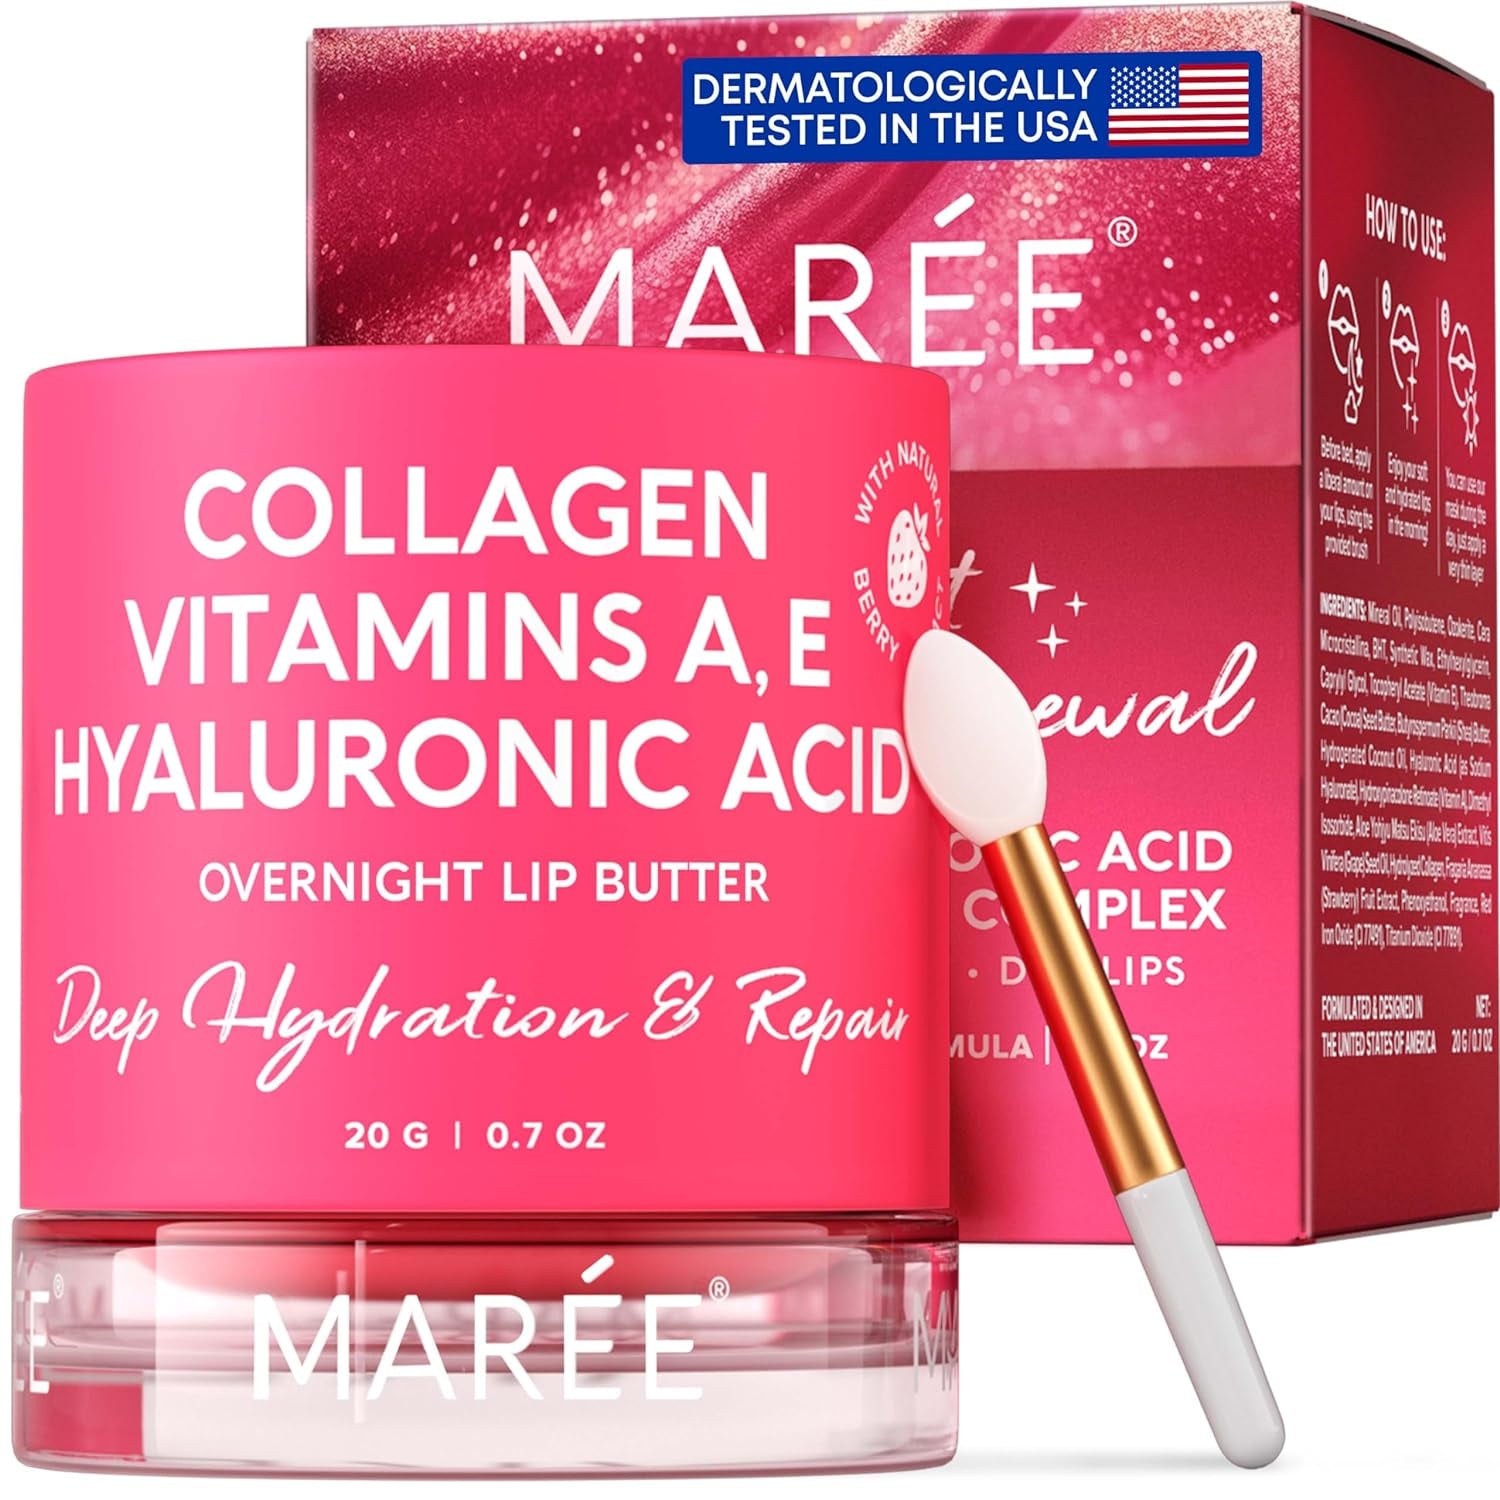 "Maree Hydrating Overnight Lip Mask with Hyaluronic Acid & Coconut Oil"